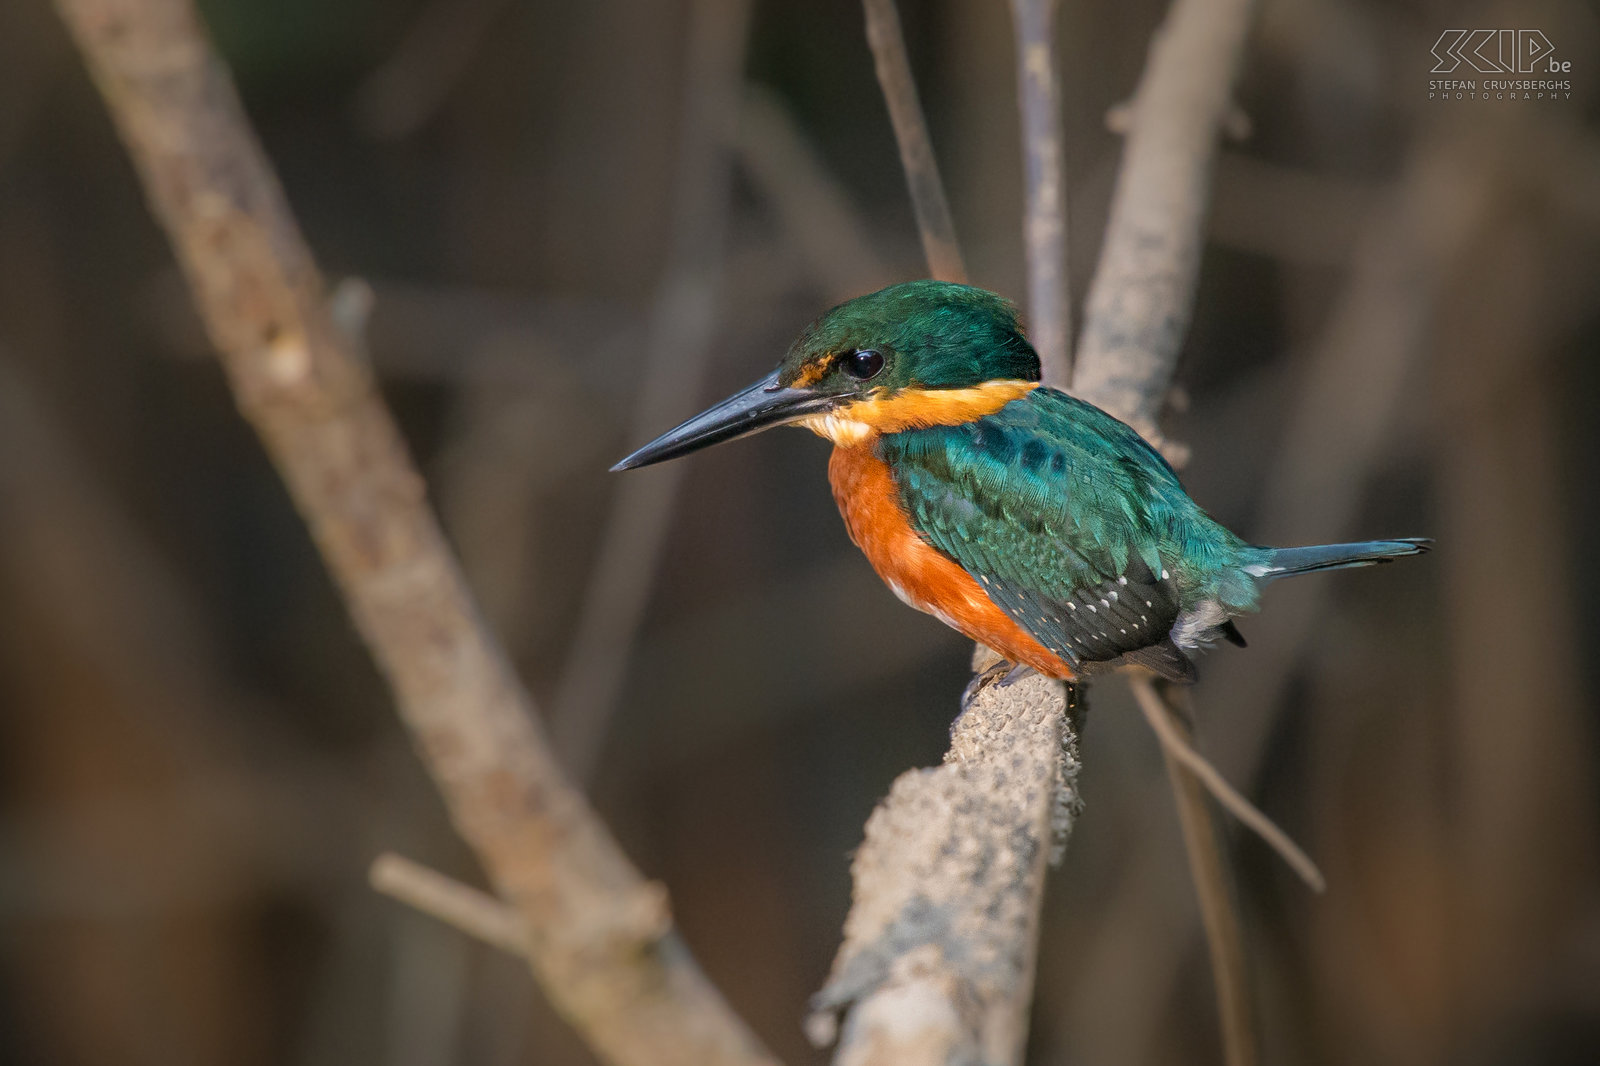 Tarcoles river - American pigmy kingfisher The American pygmy kingfisher (chloroceryle aenea) is a resident breeding bird in the mangroves of Tarcoles. It is one of the smallest kingfishers in the world. It is 13 cm long and weighs 18g.  Stefan Cruysberghs